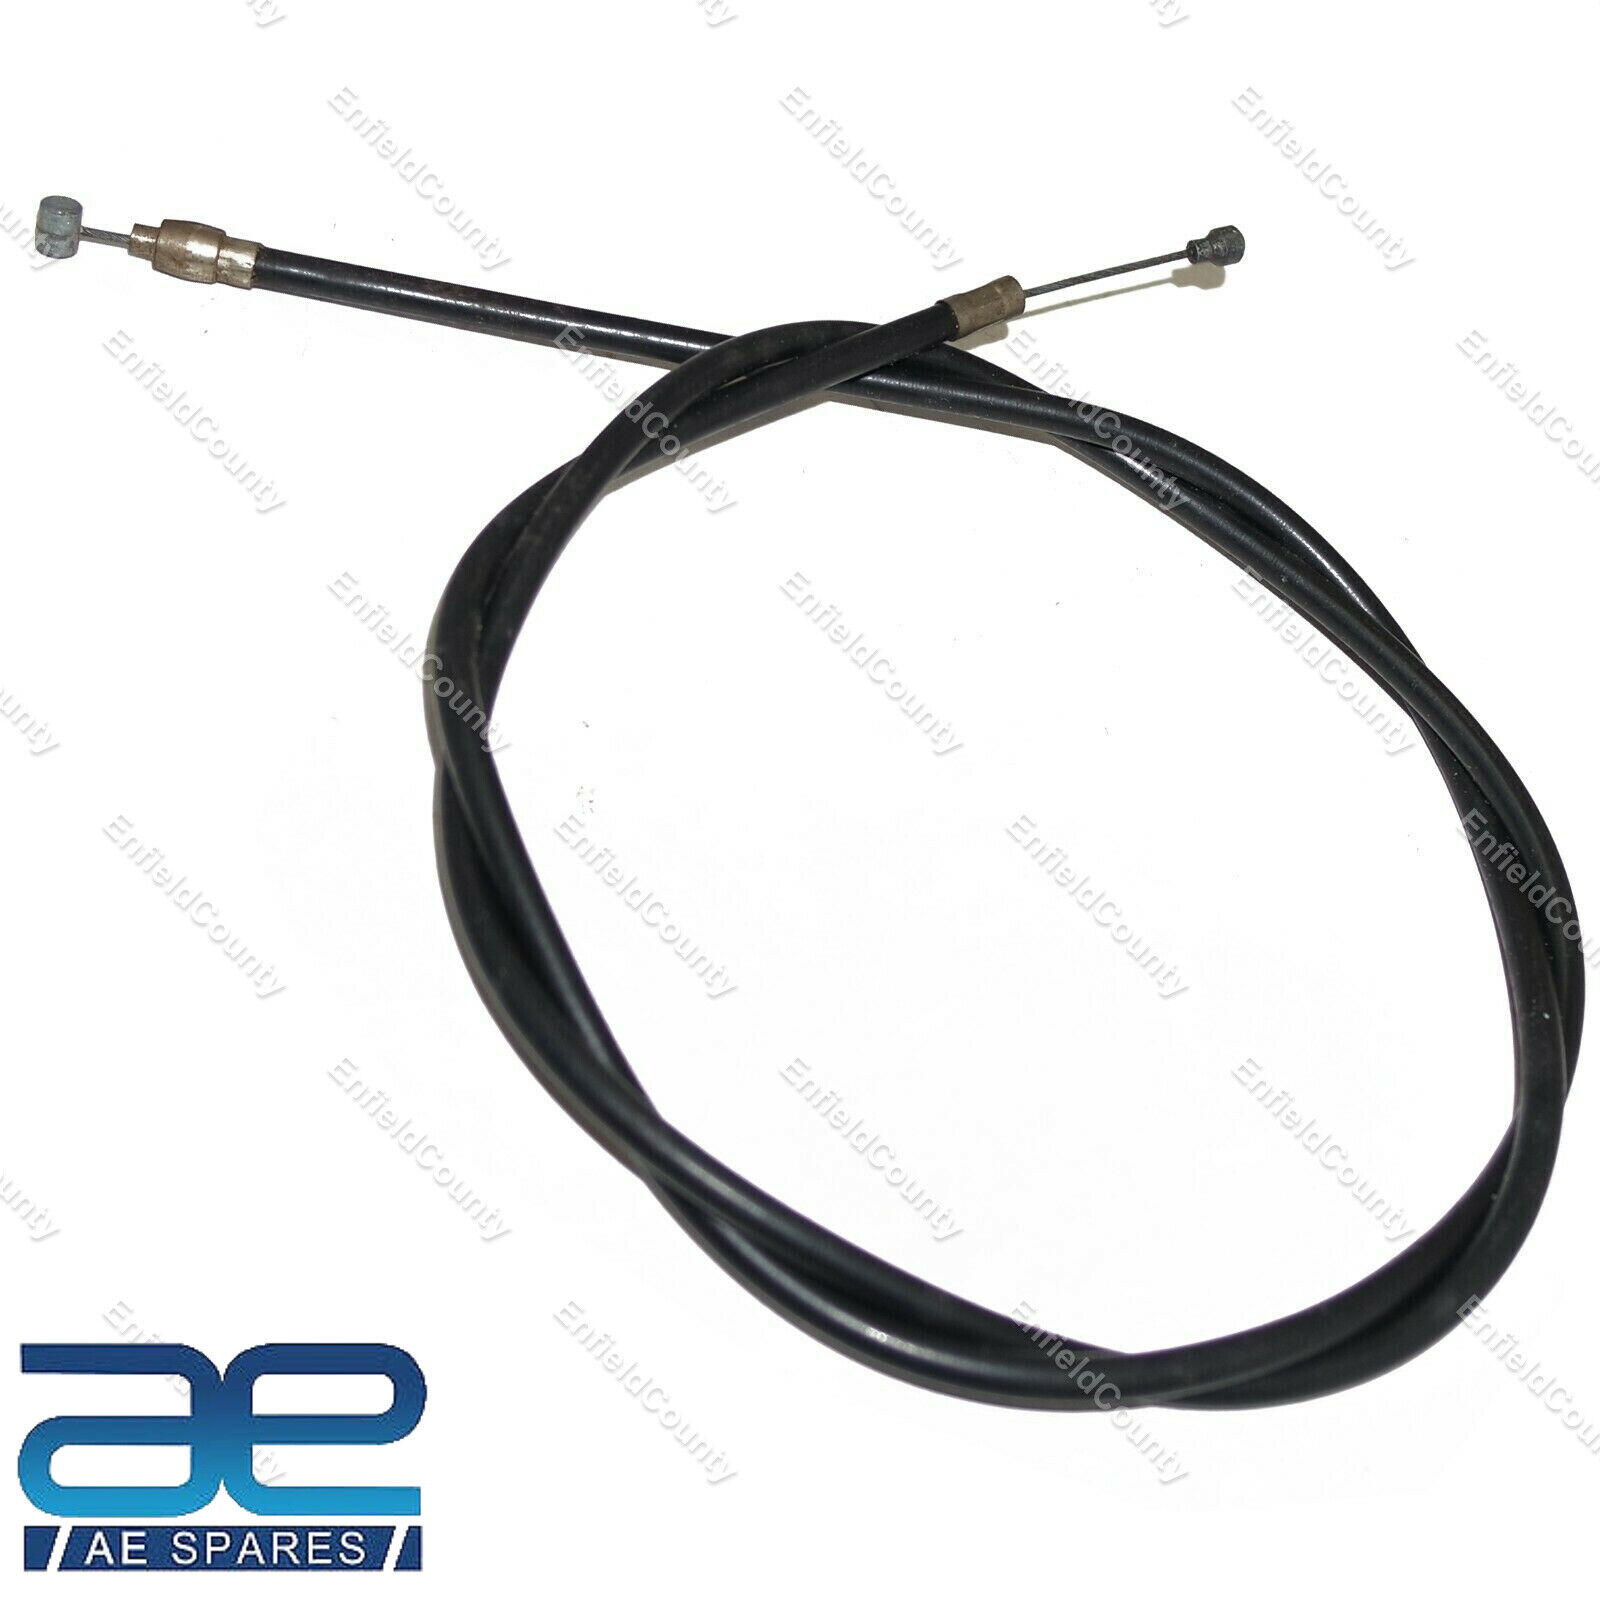 Decompressor Cable 39" Inch Long for Luna TFR Moped 